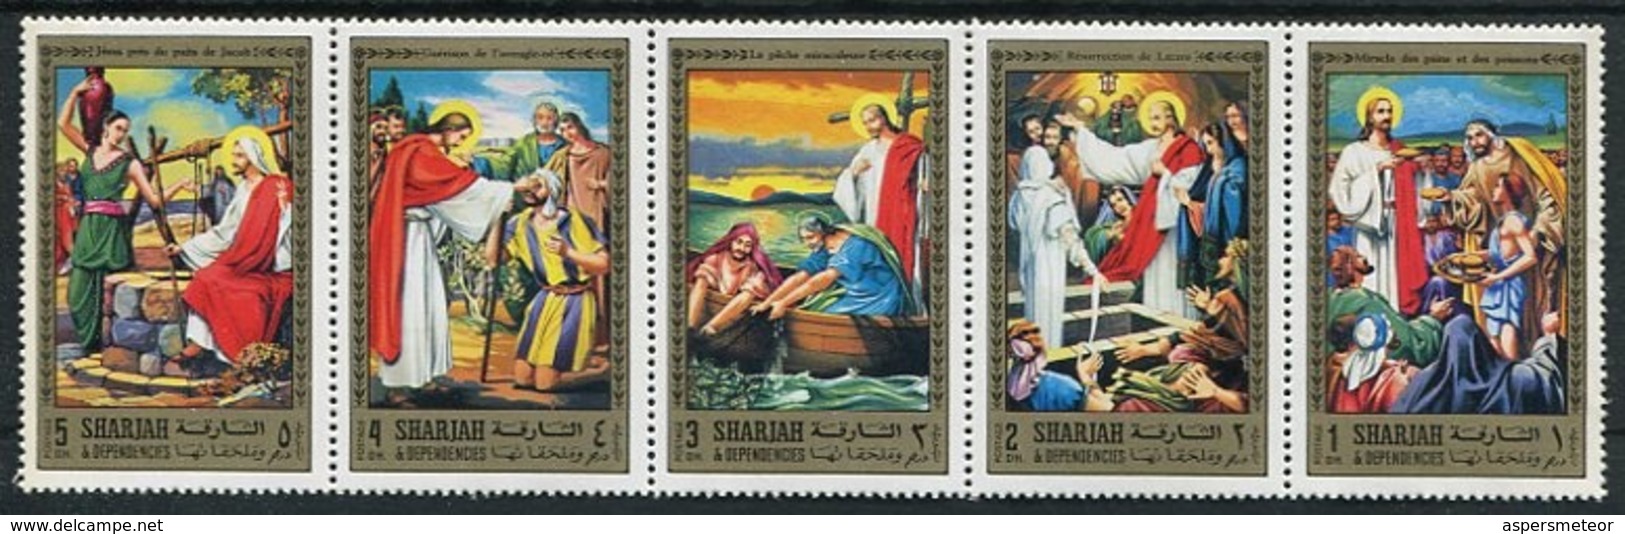 MIRACLES OF JESUS / MILAGROS DE JESUS - SHARJAH MICHEL 759 / 763 MNH GOLD SERIE - LILHU - Cristianismo